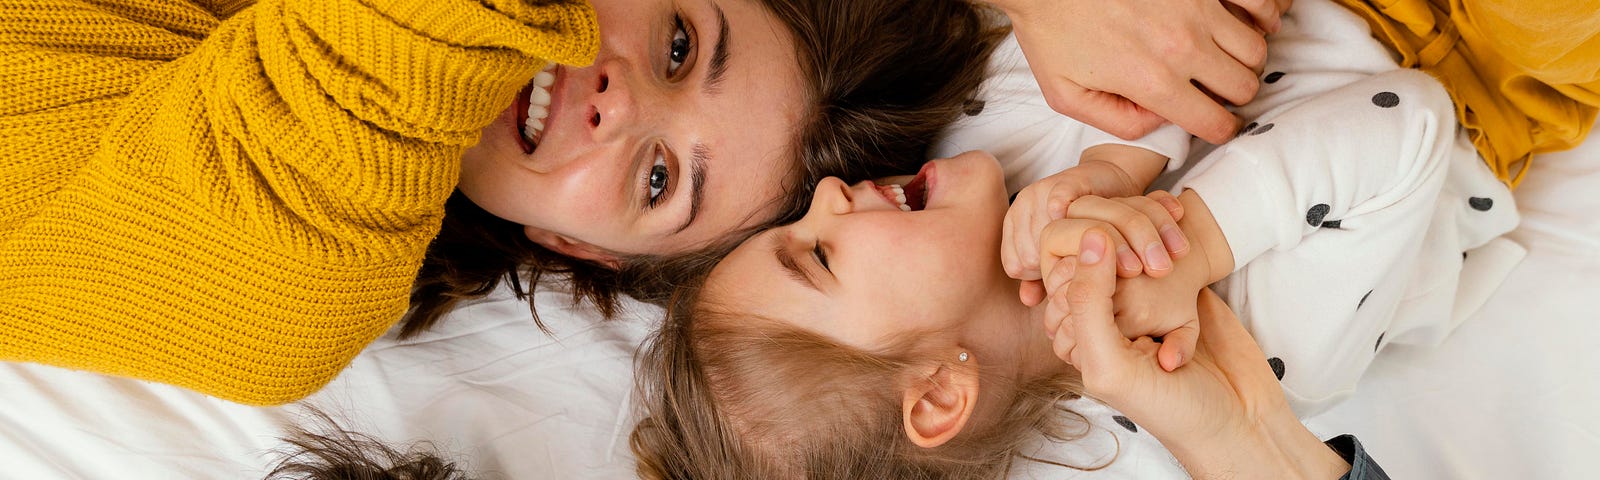 Is Co-Sleeping With Older Children Wrong? Yes, No?